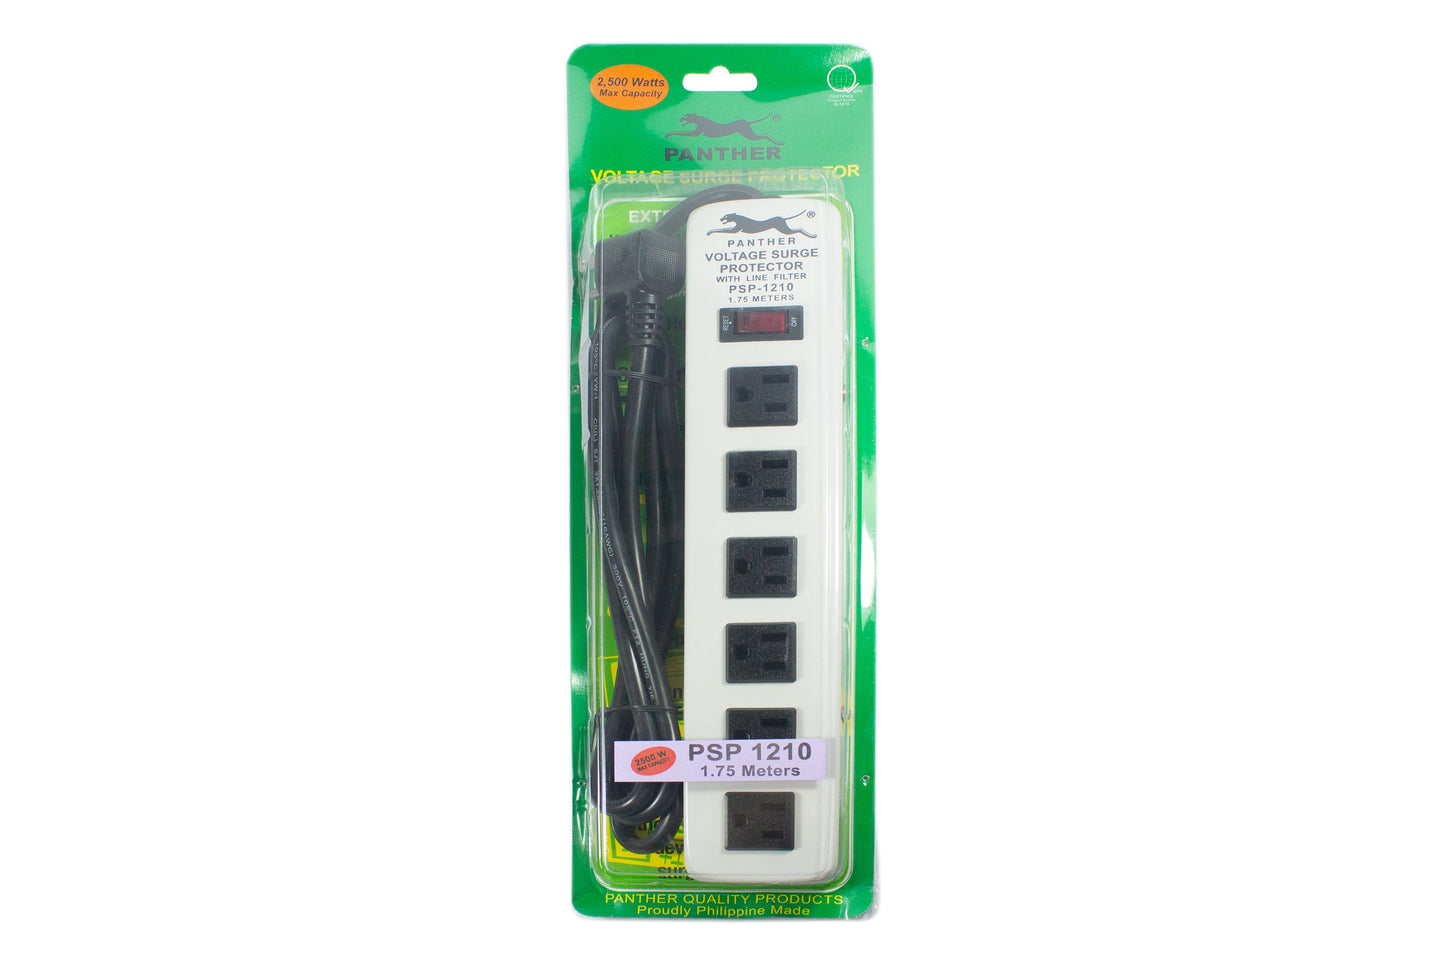 Panther 1.75M (PSP-1210) Voltage Surge Protector